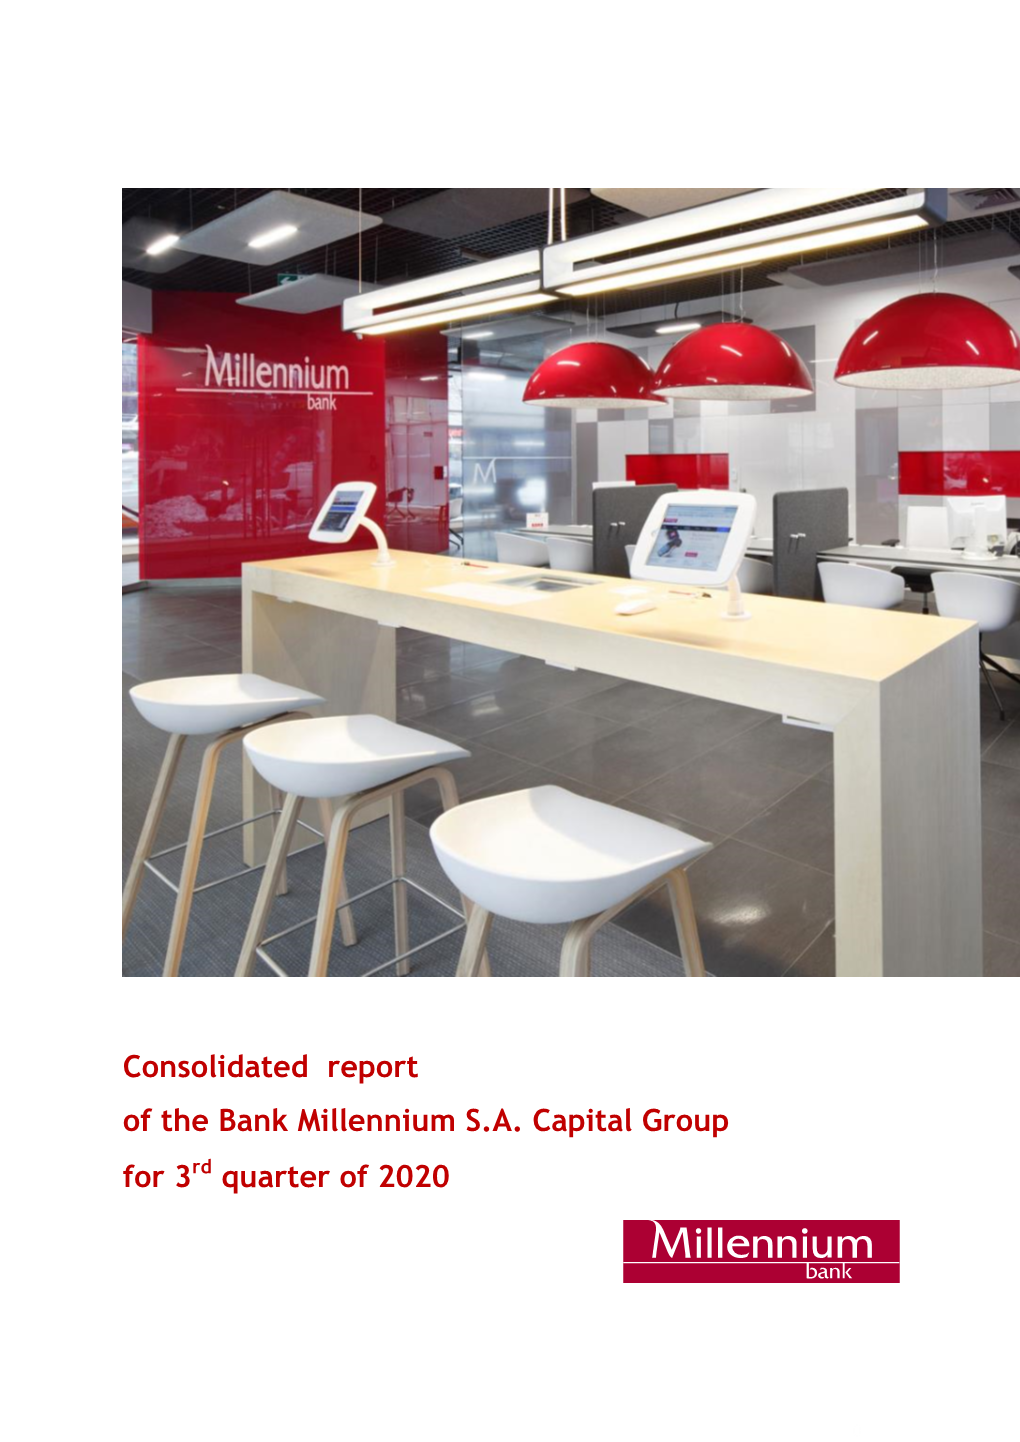 Consolidated Report of the Bank Millennium S.A. Capital Group for 3Rd Quarter of 2020